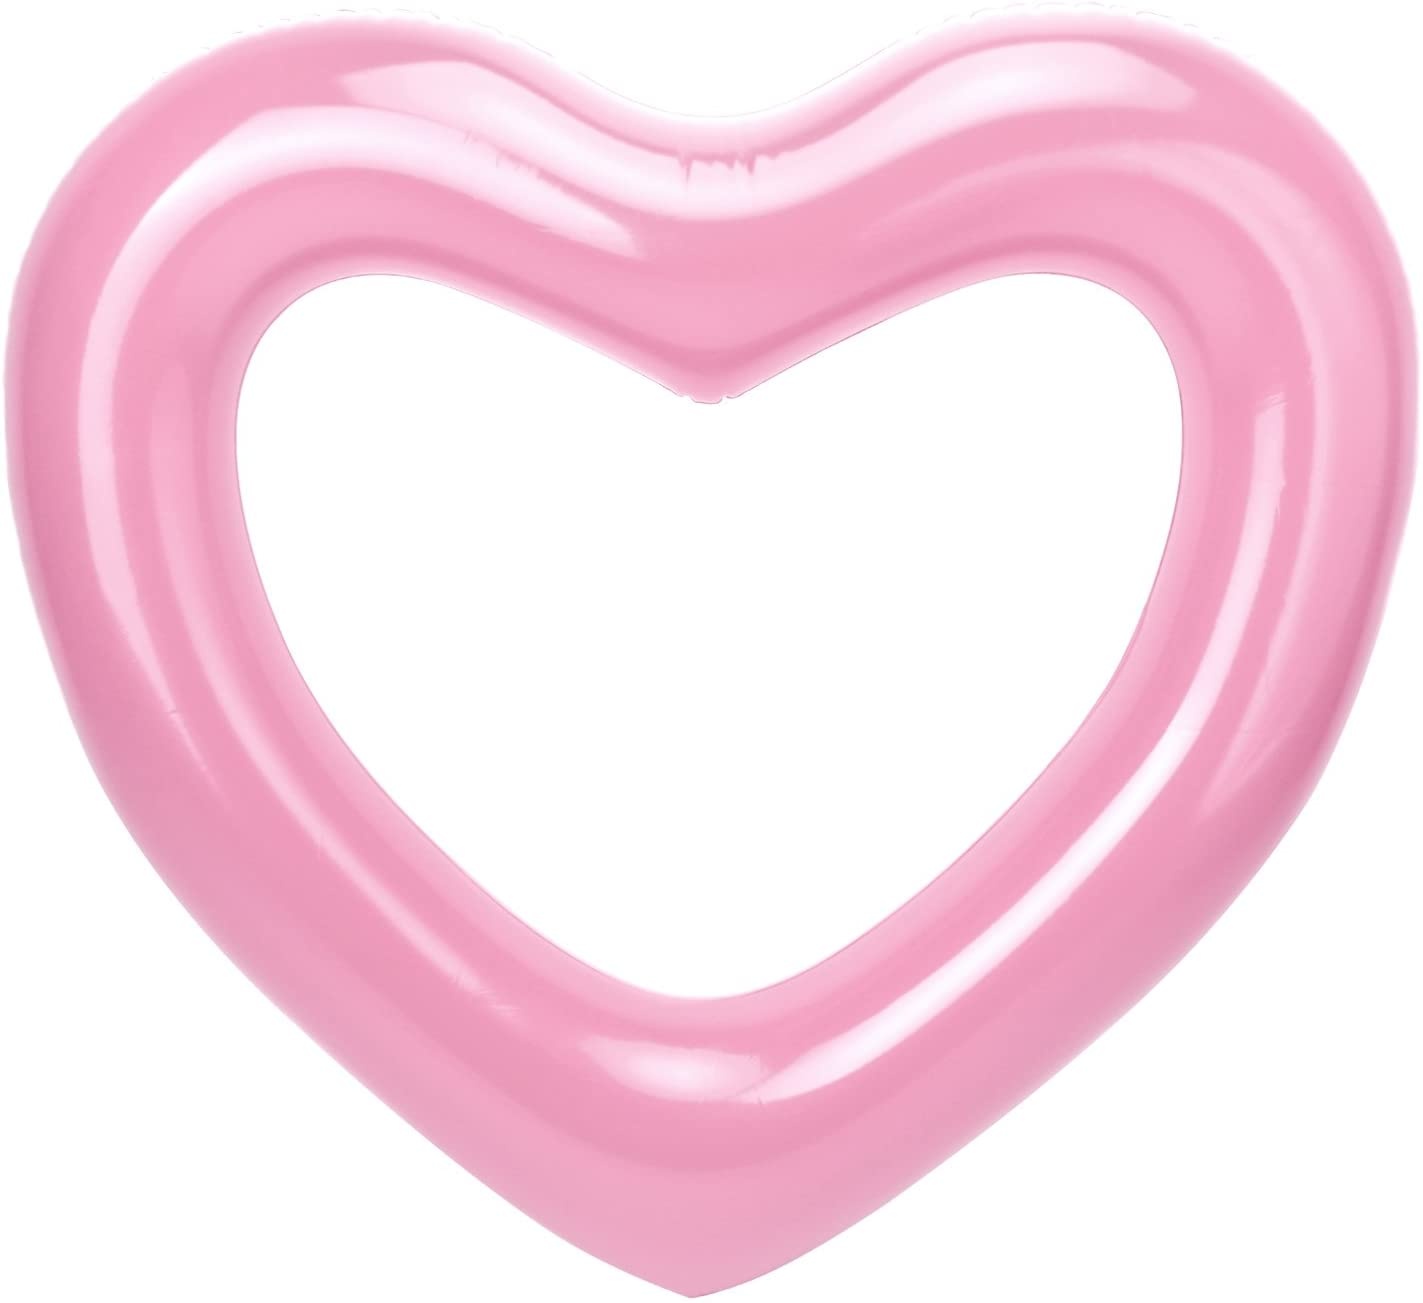 Heart-shaped swimming ring Inflatable swimming ring pool floating Summer beach pool party toys for children and adults